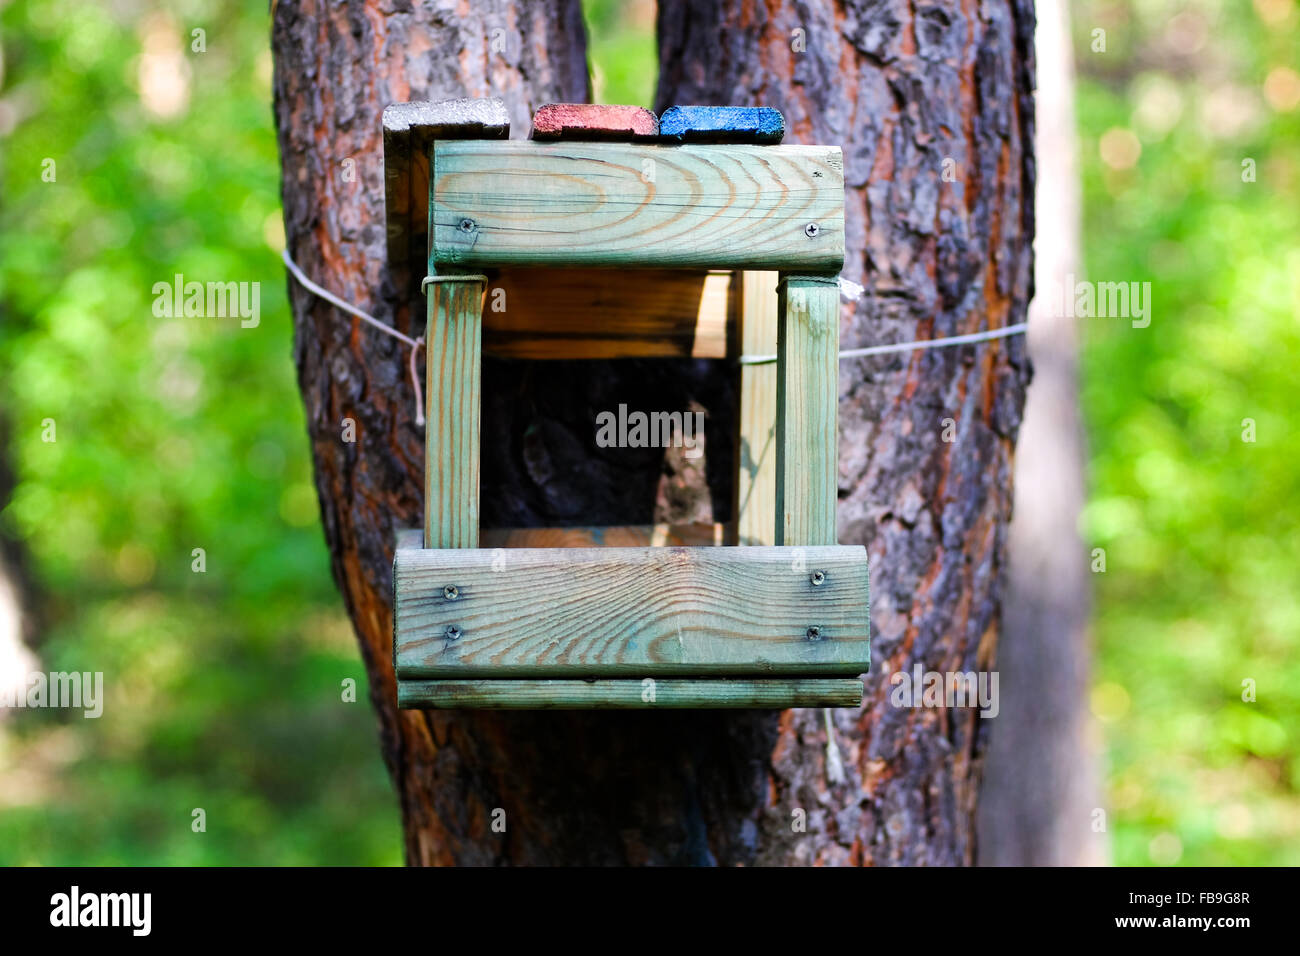 Wooden feeder for birds and squirrels on a pine tree Stock Photo